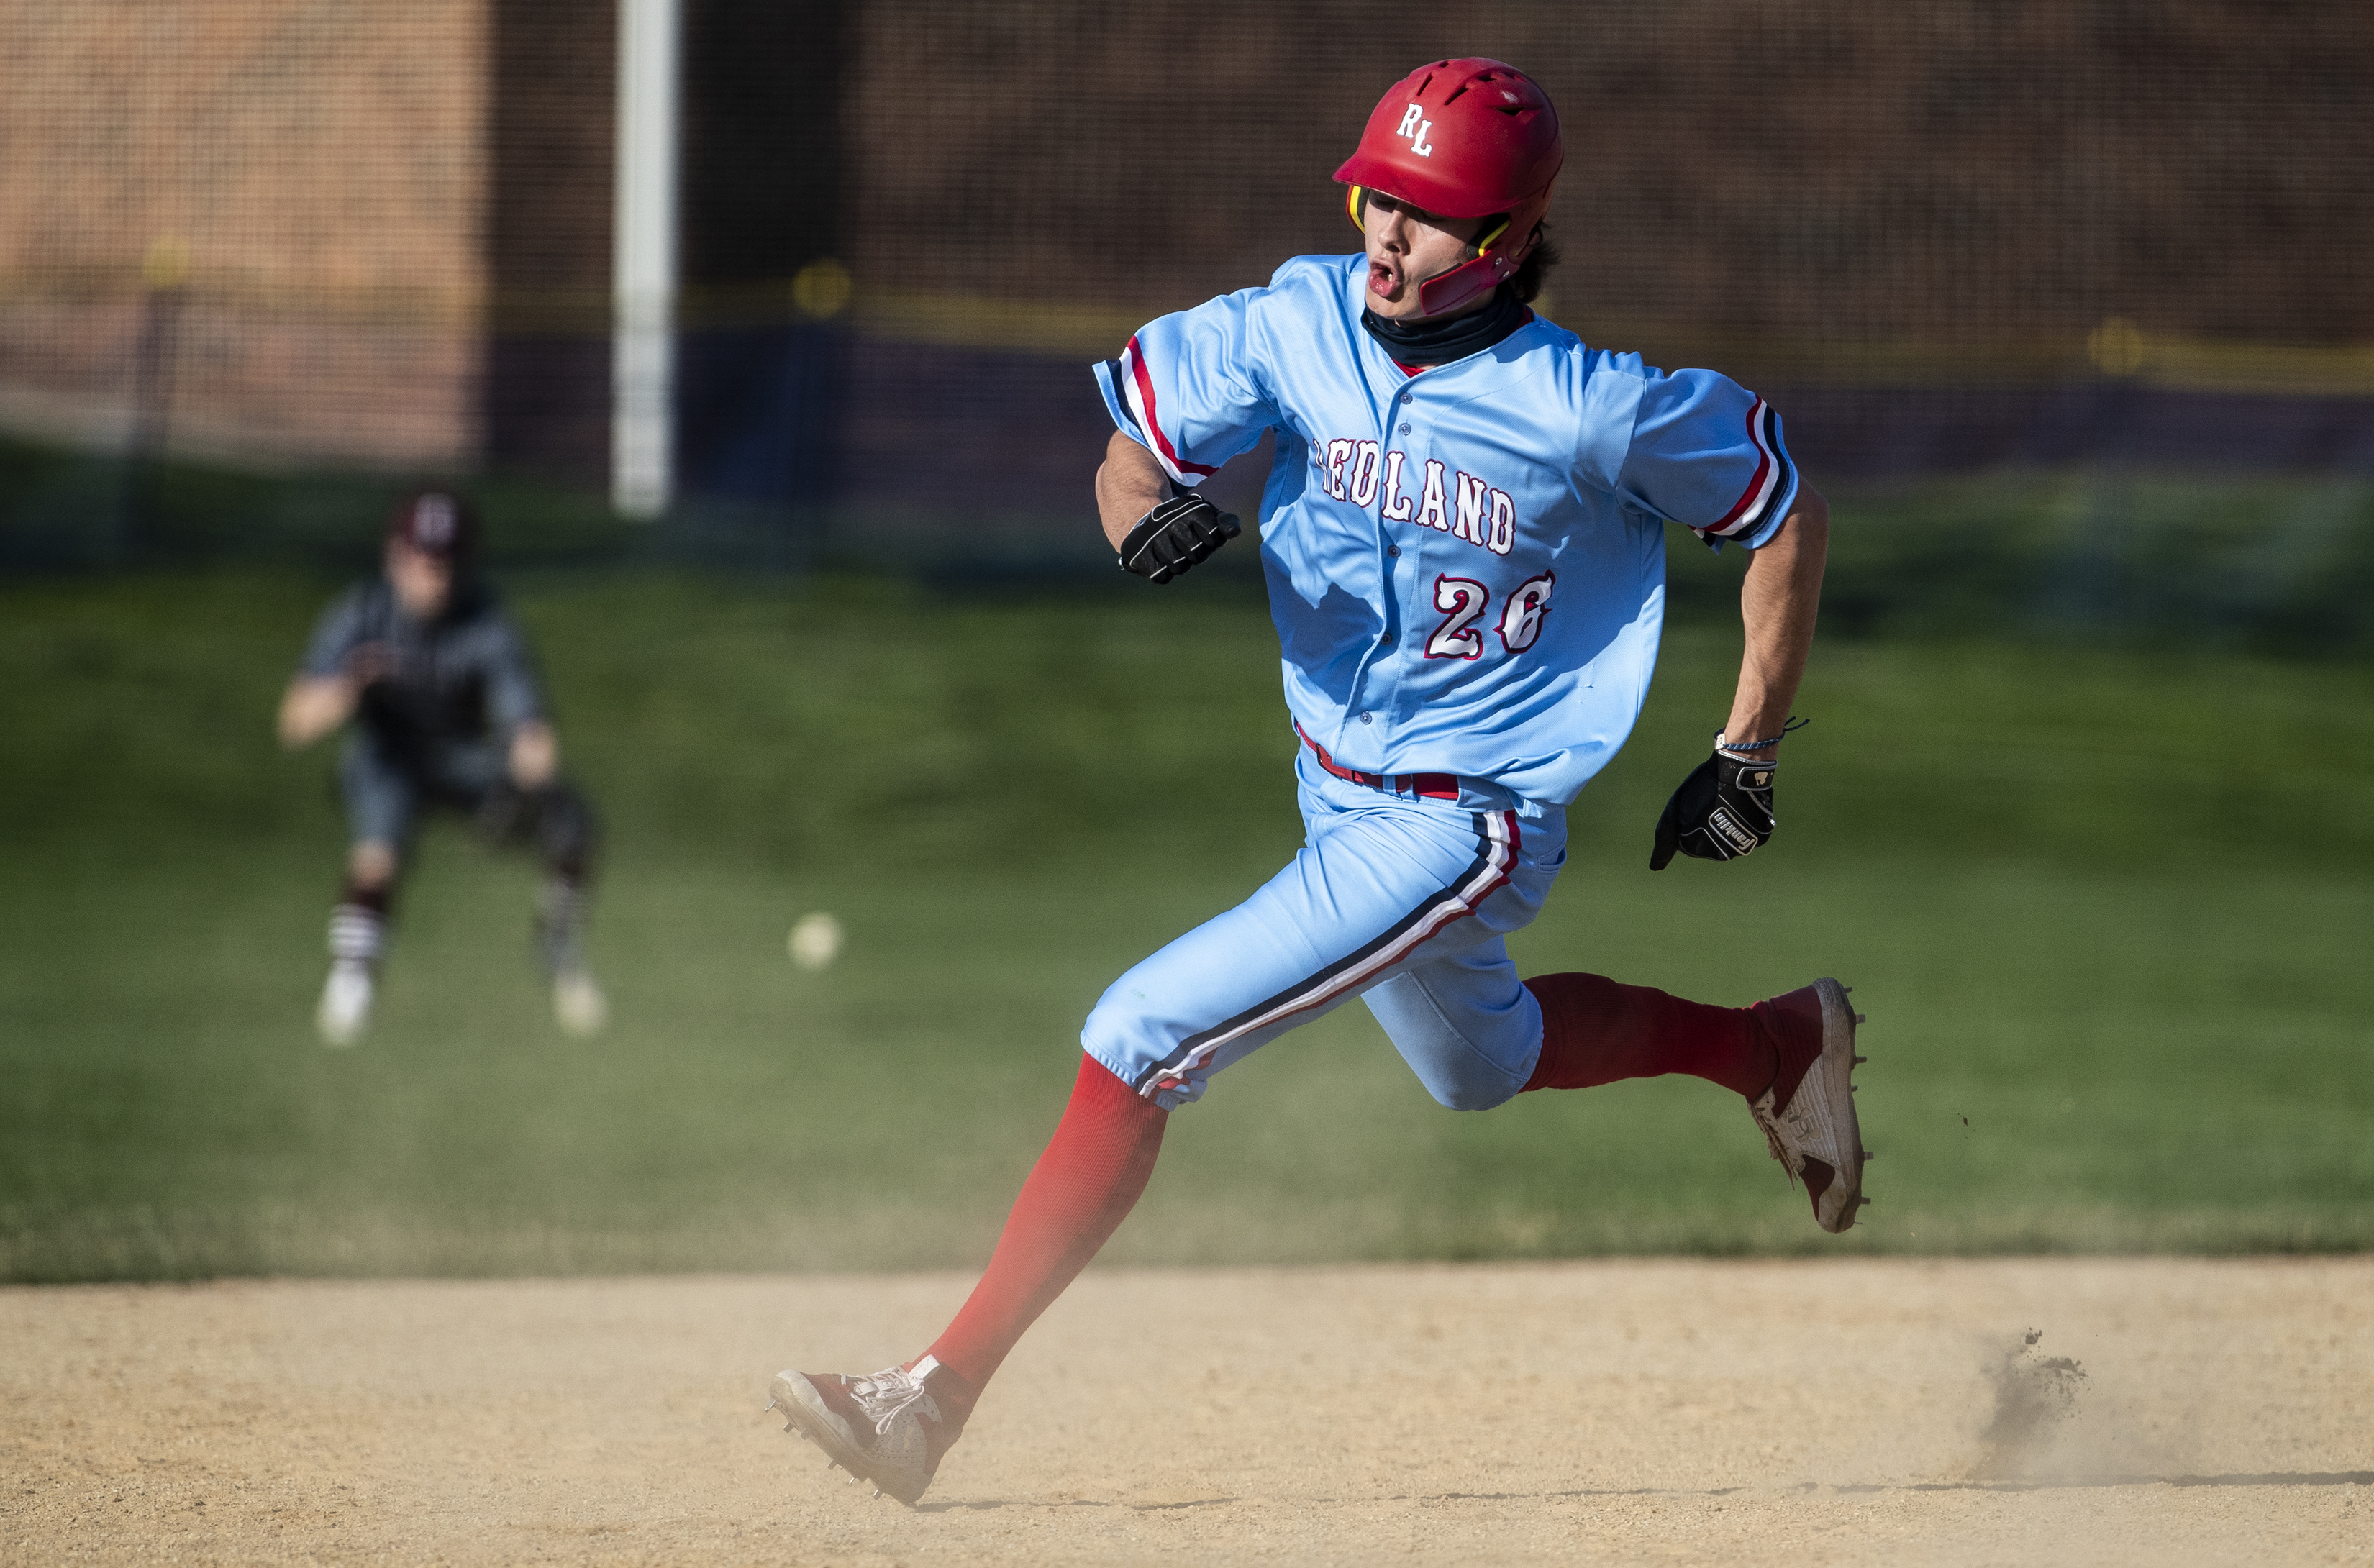 2021 MLB Draft Scouting Report: Benny Montgomery - Lookout Landing